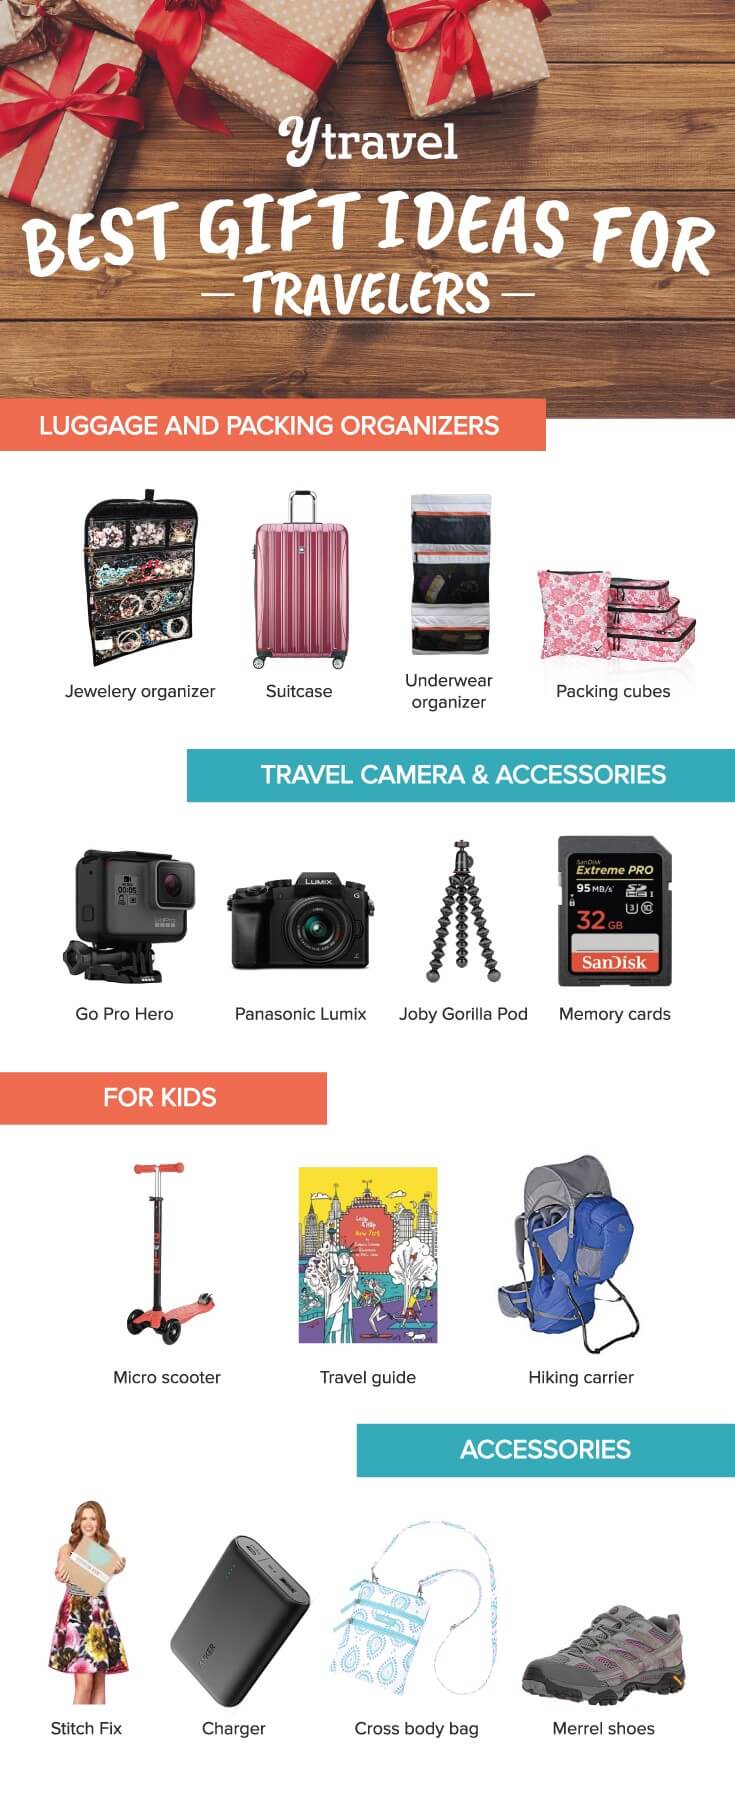 Looking for the best gift ideas for travelers? This list of the best travel gifts includes gifts for women, kids, electronics, packing essentials and more!